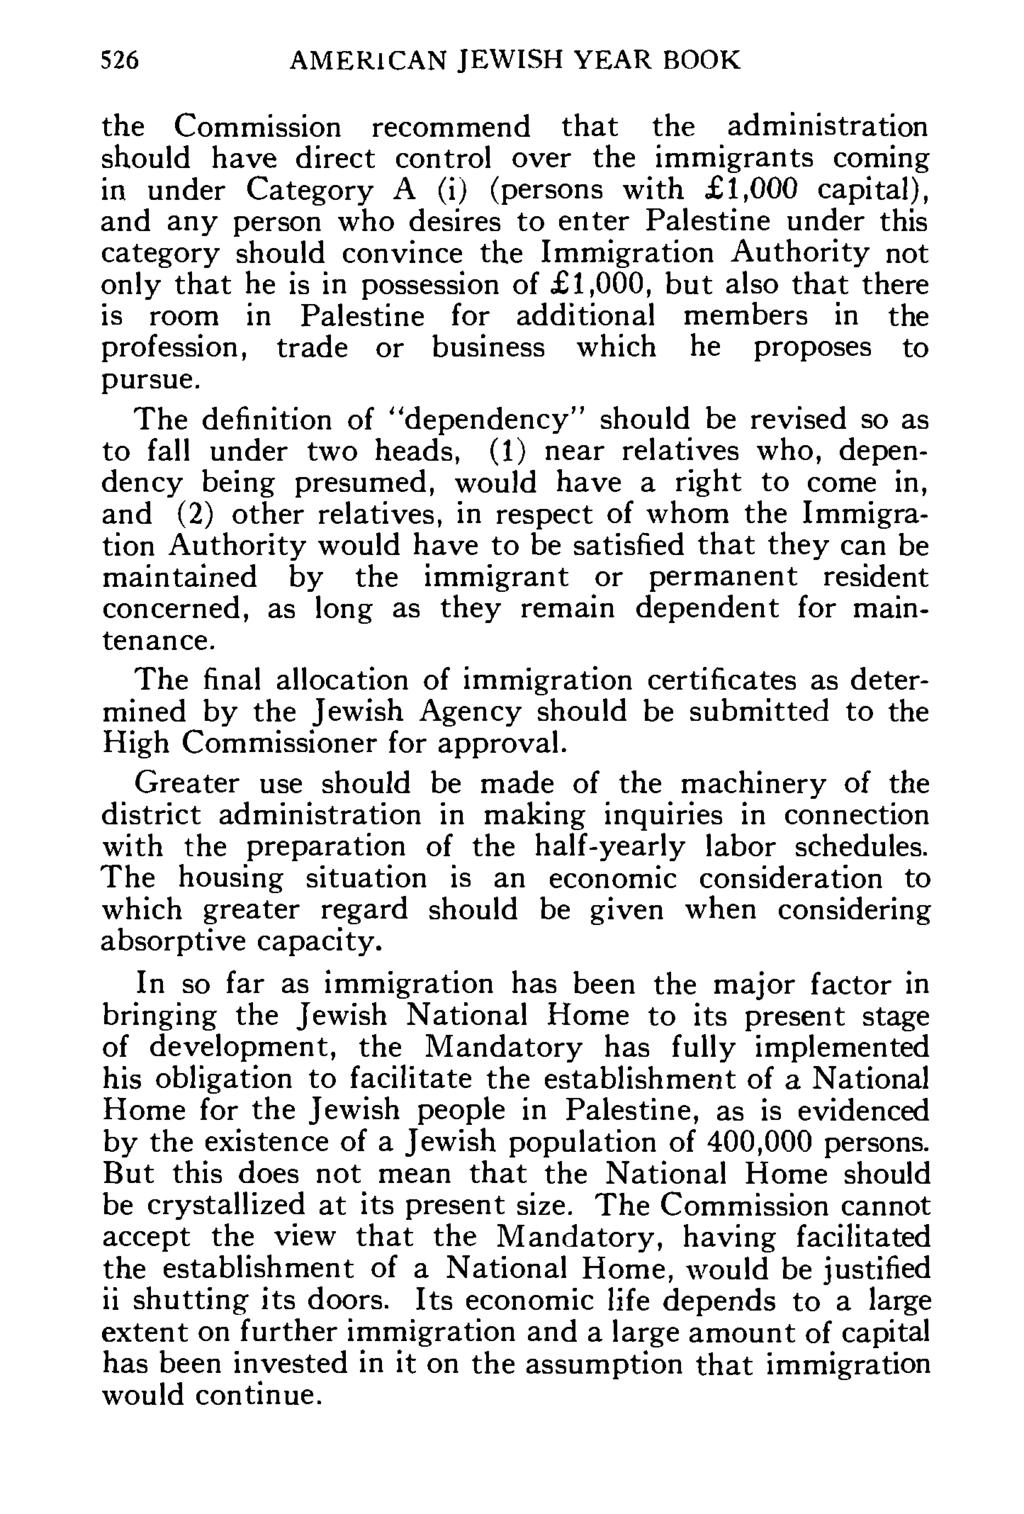 526 AMERICAN JEWISH YEAR BOOK the Commission recommend that the administration should have direct control over the immigrants coming in under Category A (i) (persons with 1,000 capital), and any